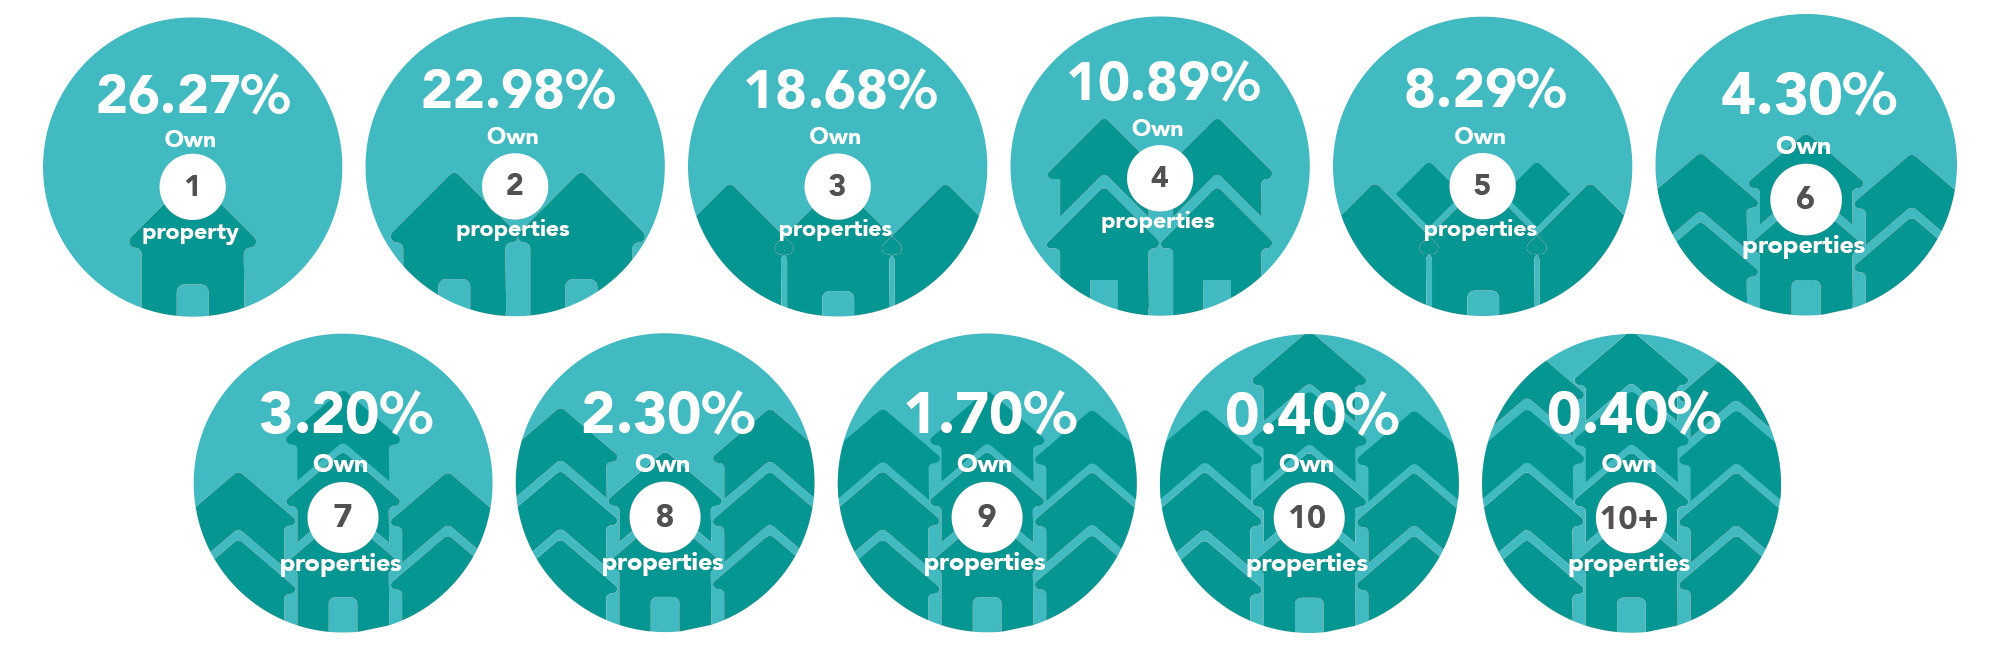 How many investment properties do you currently own?